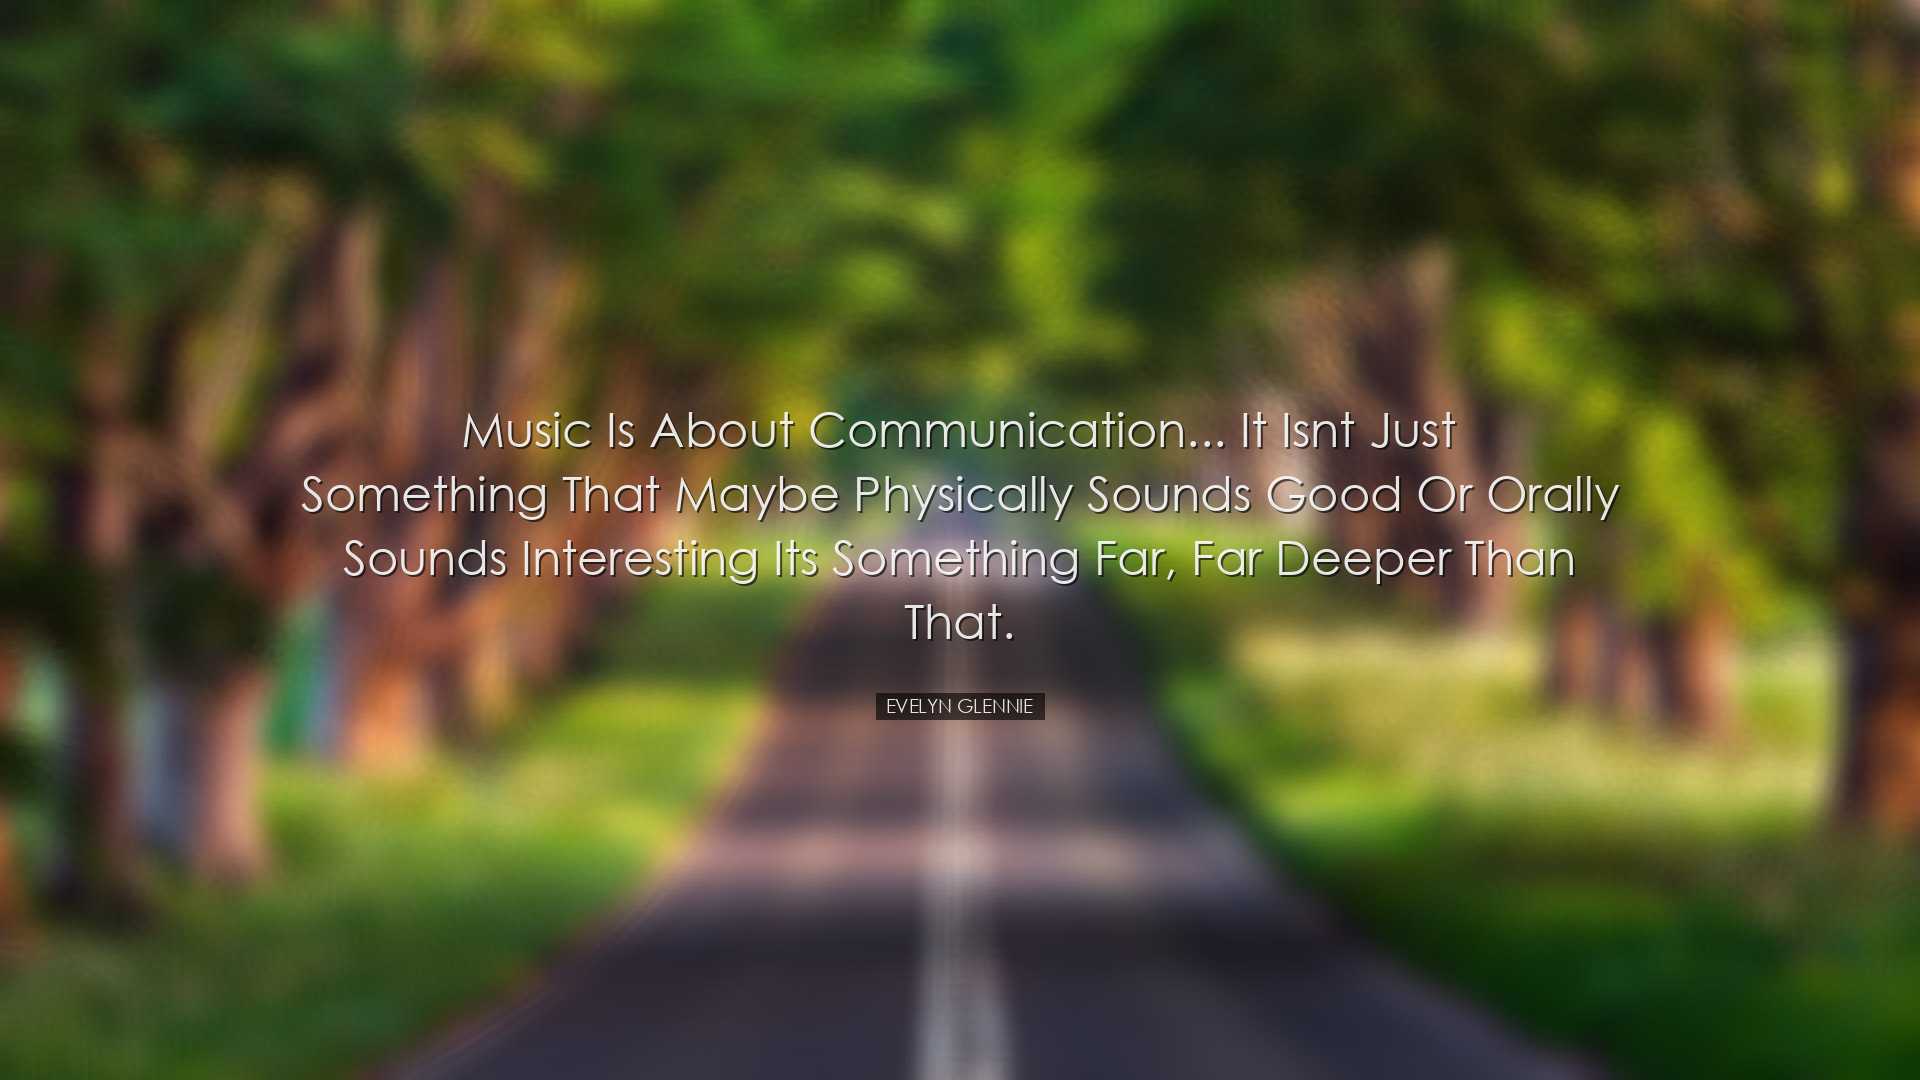 Music is about communication... it isnt just something that maybe